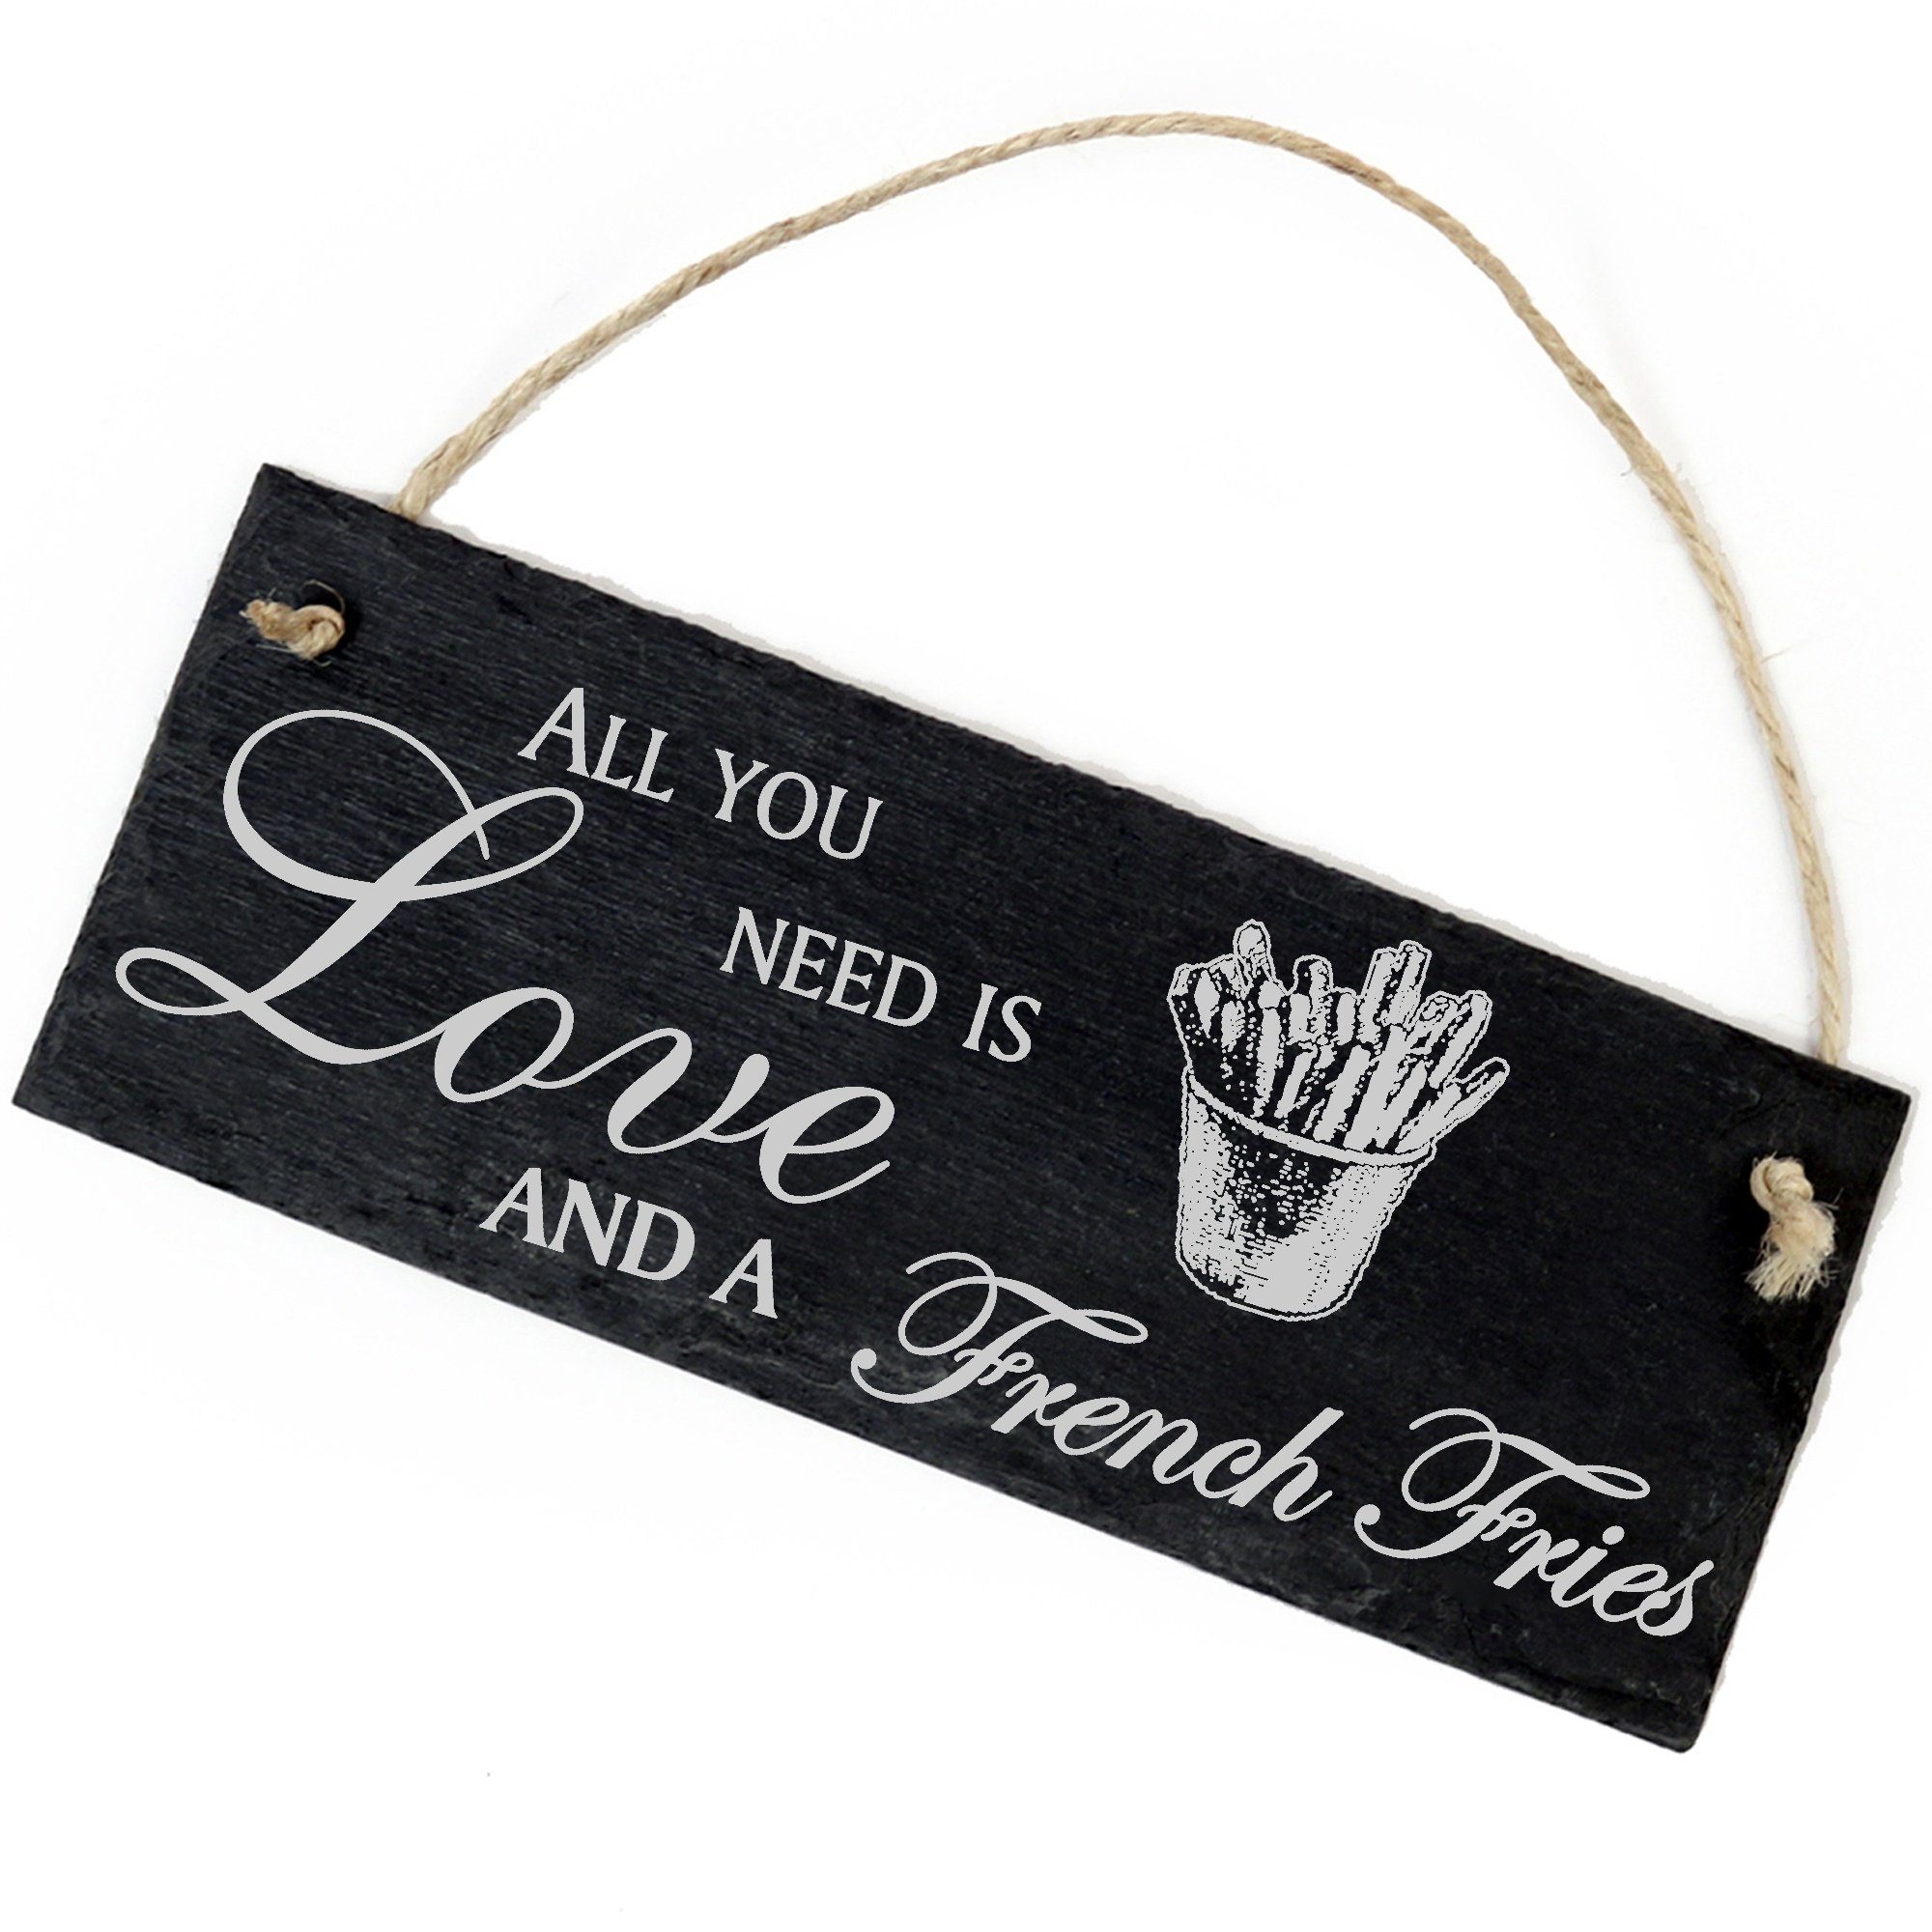 Dekolando Hängedekoration Pommes 22x8cm need a All you French is Love Fries and